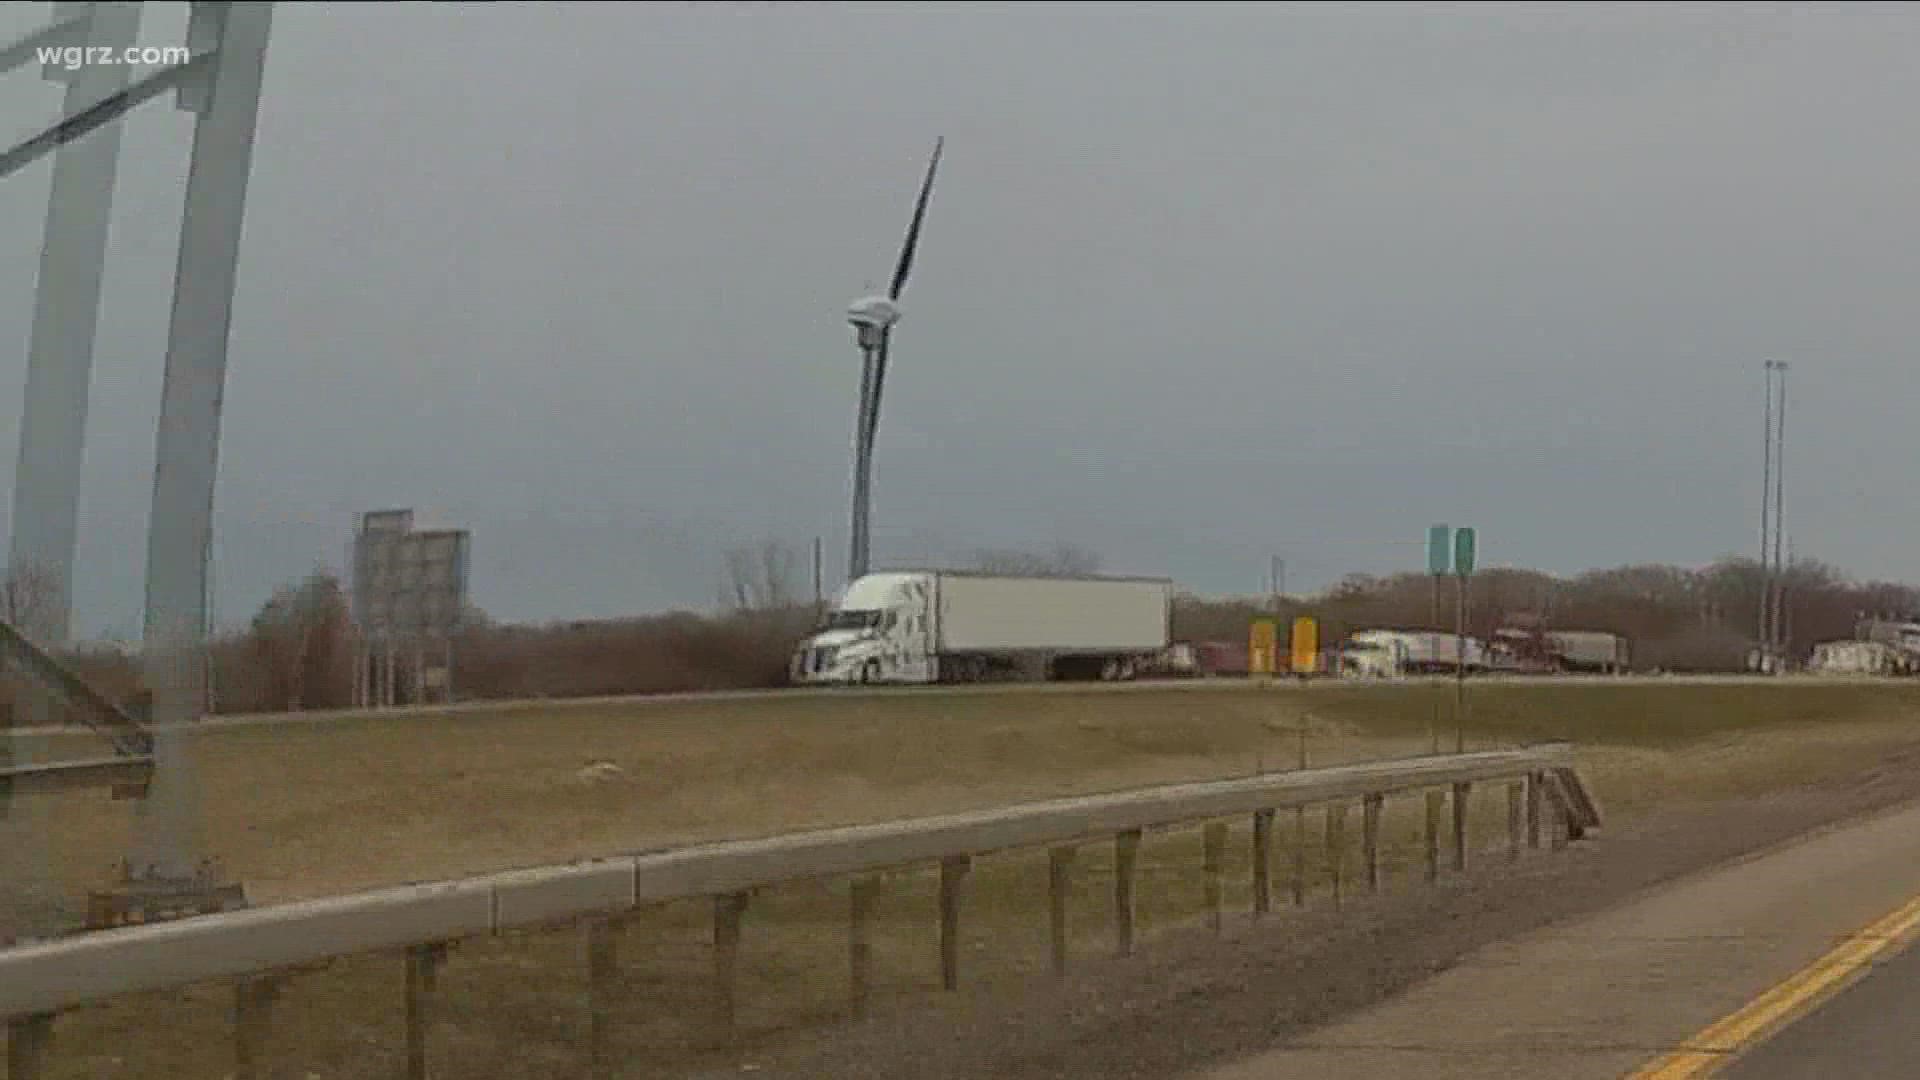 thruway authority, which spent 5 million dollars on these windmills to supply power for toll plazas and other facilities between Eden and the Pennsylvania state line